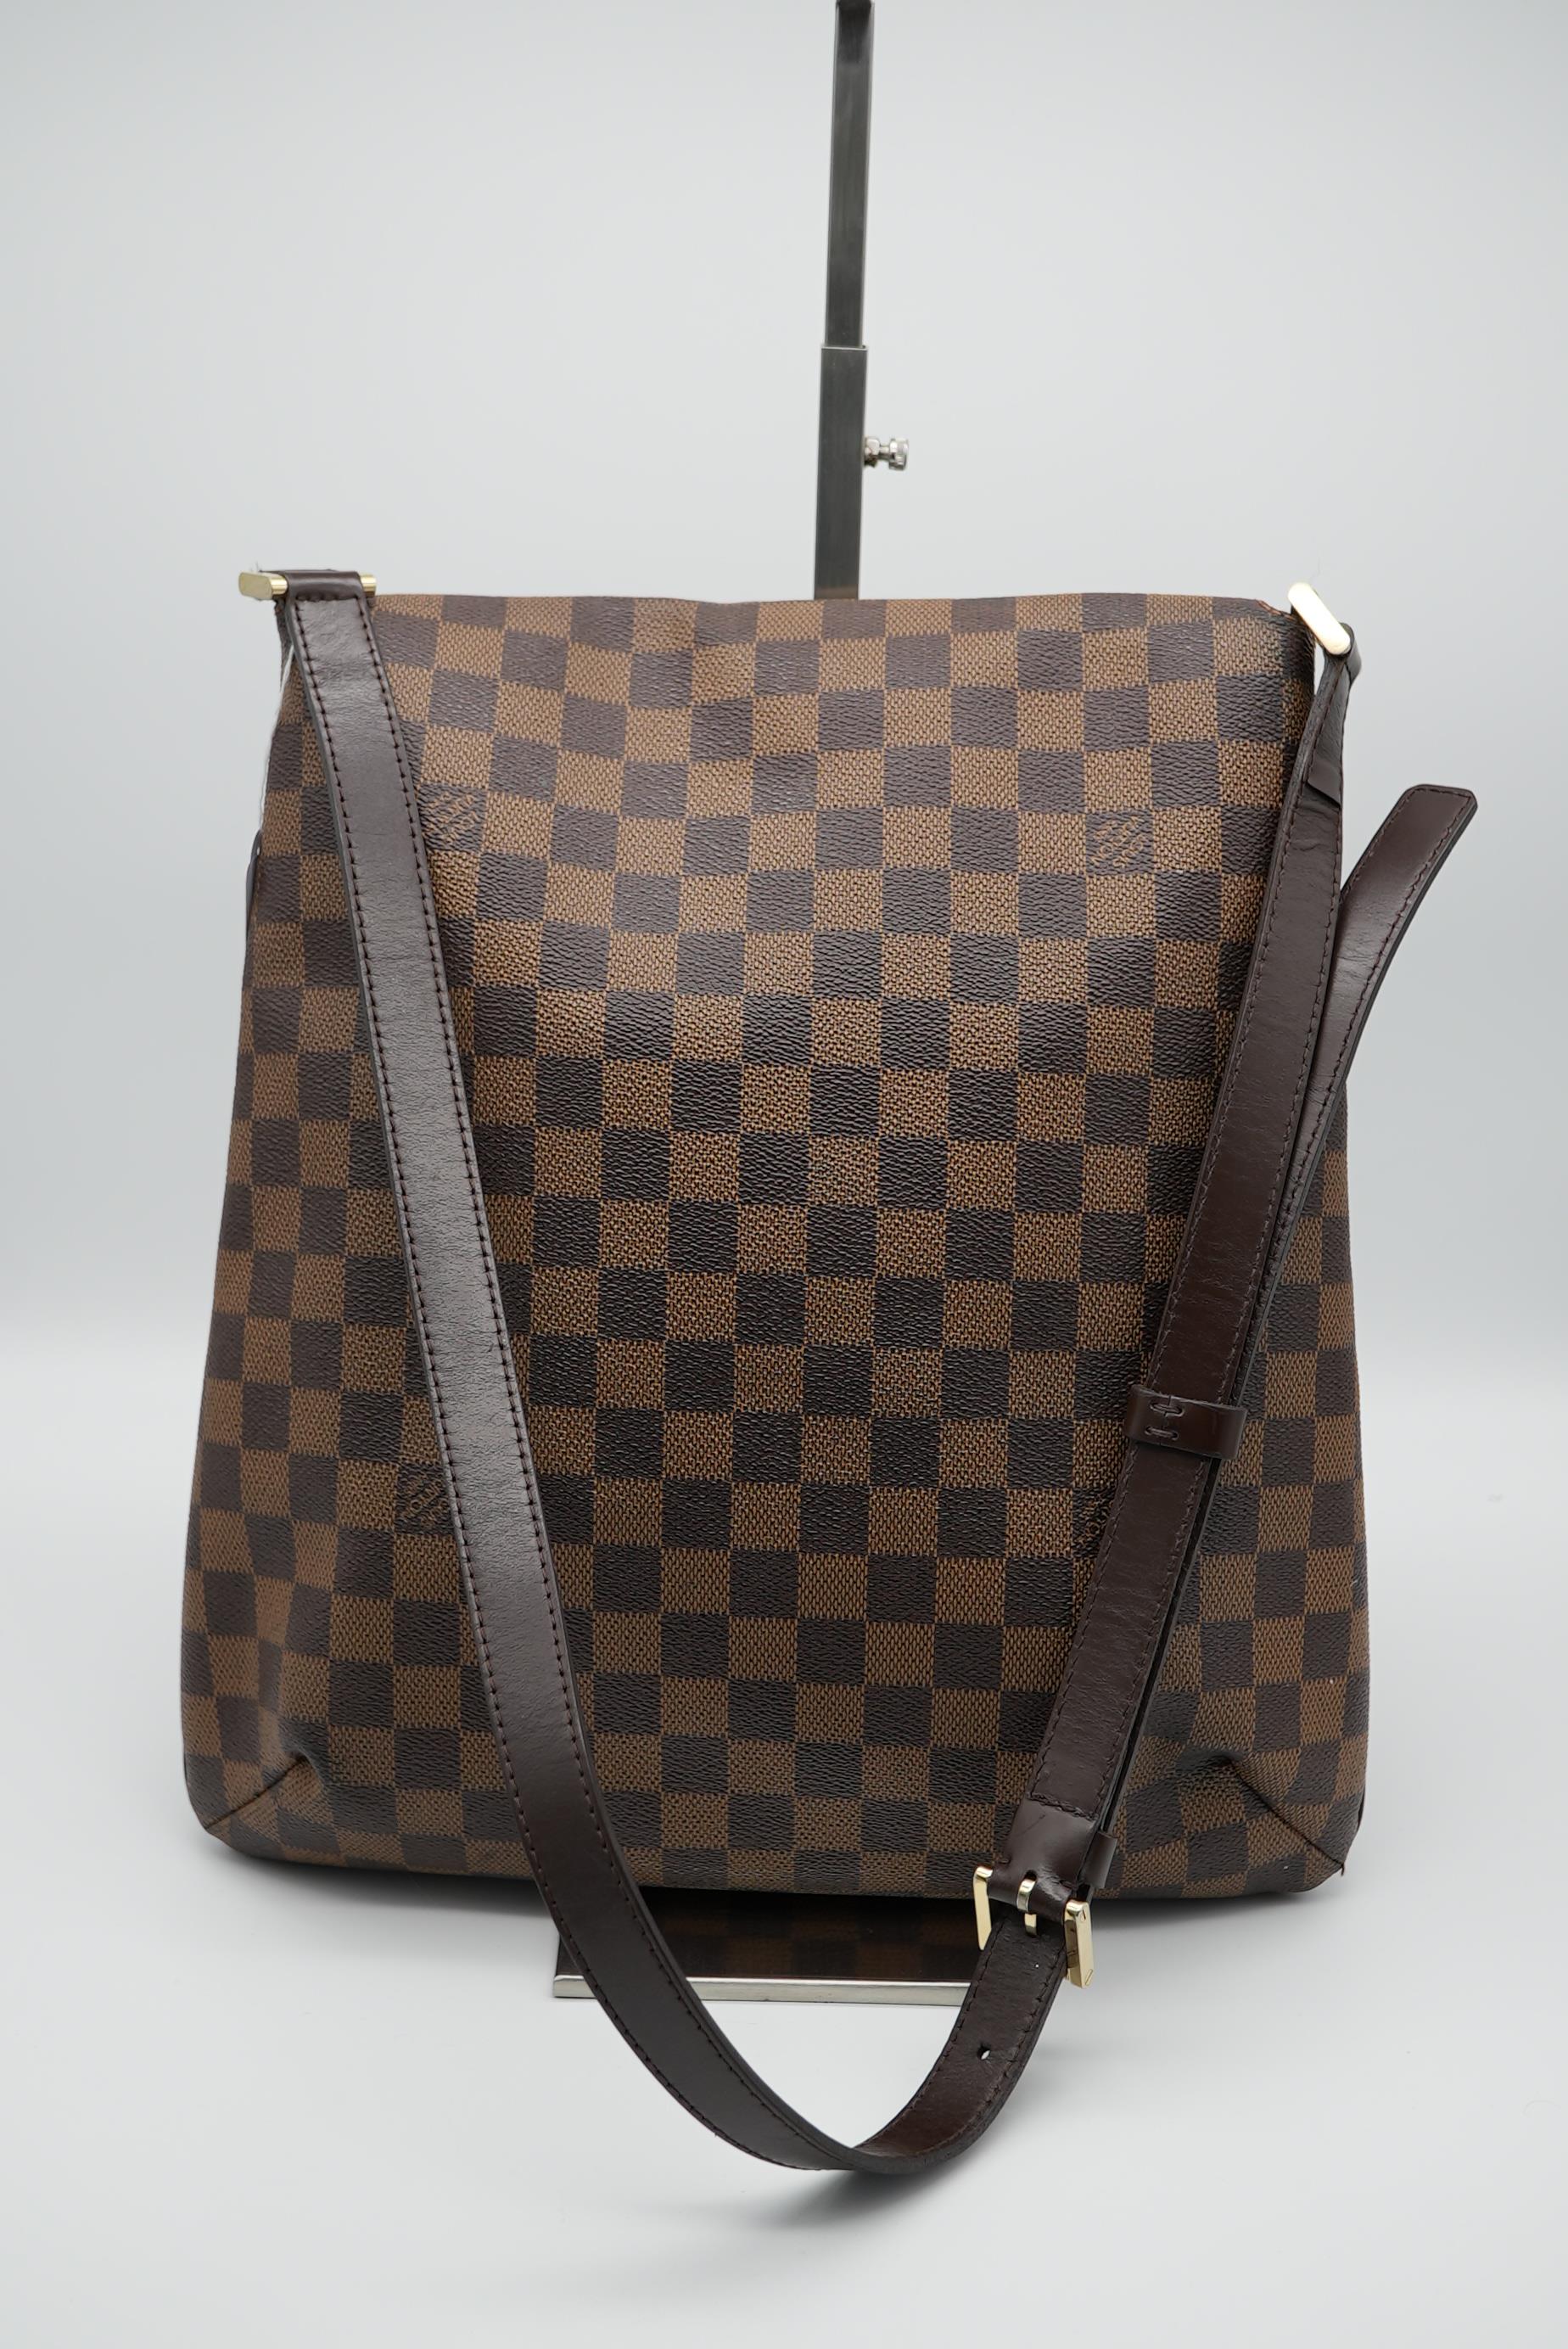 Louis Vuitton Musette GM - Image 4 of 6